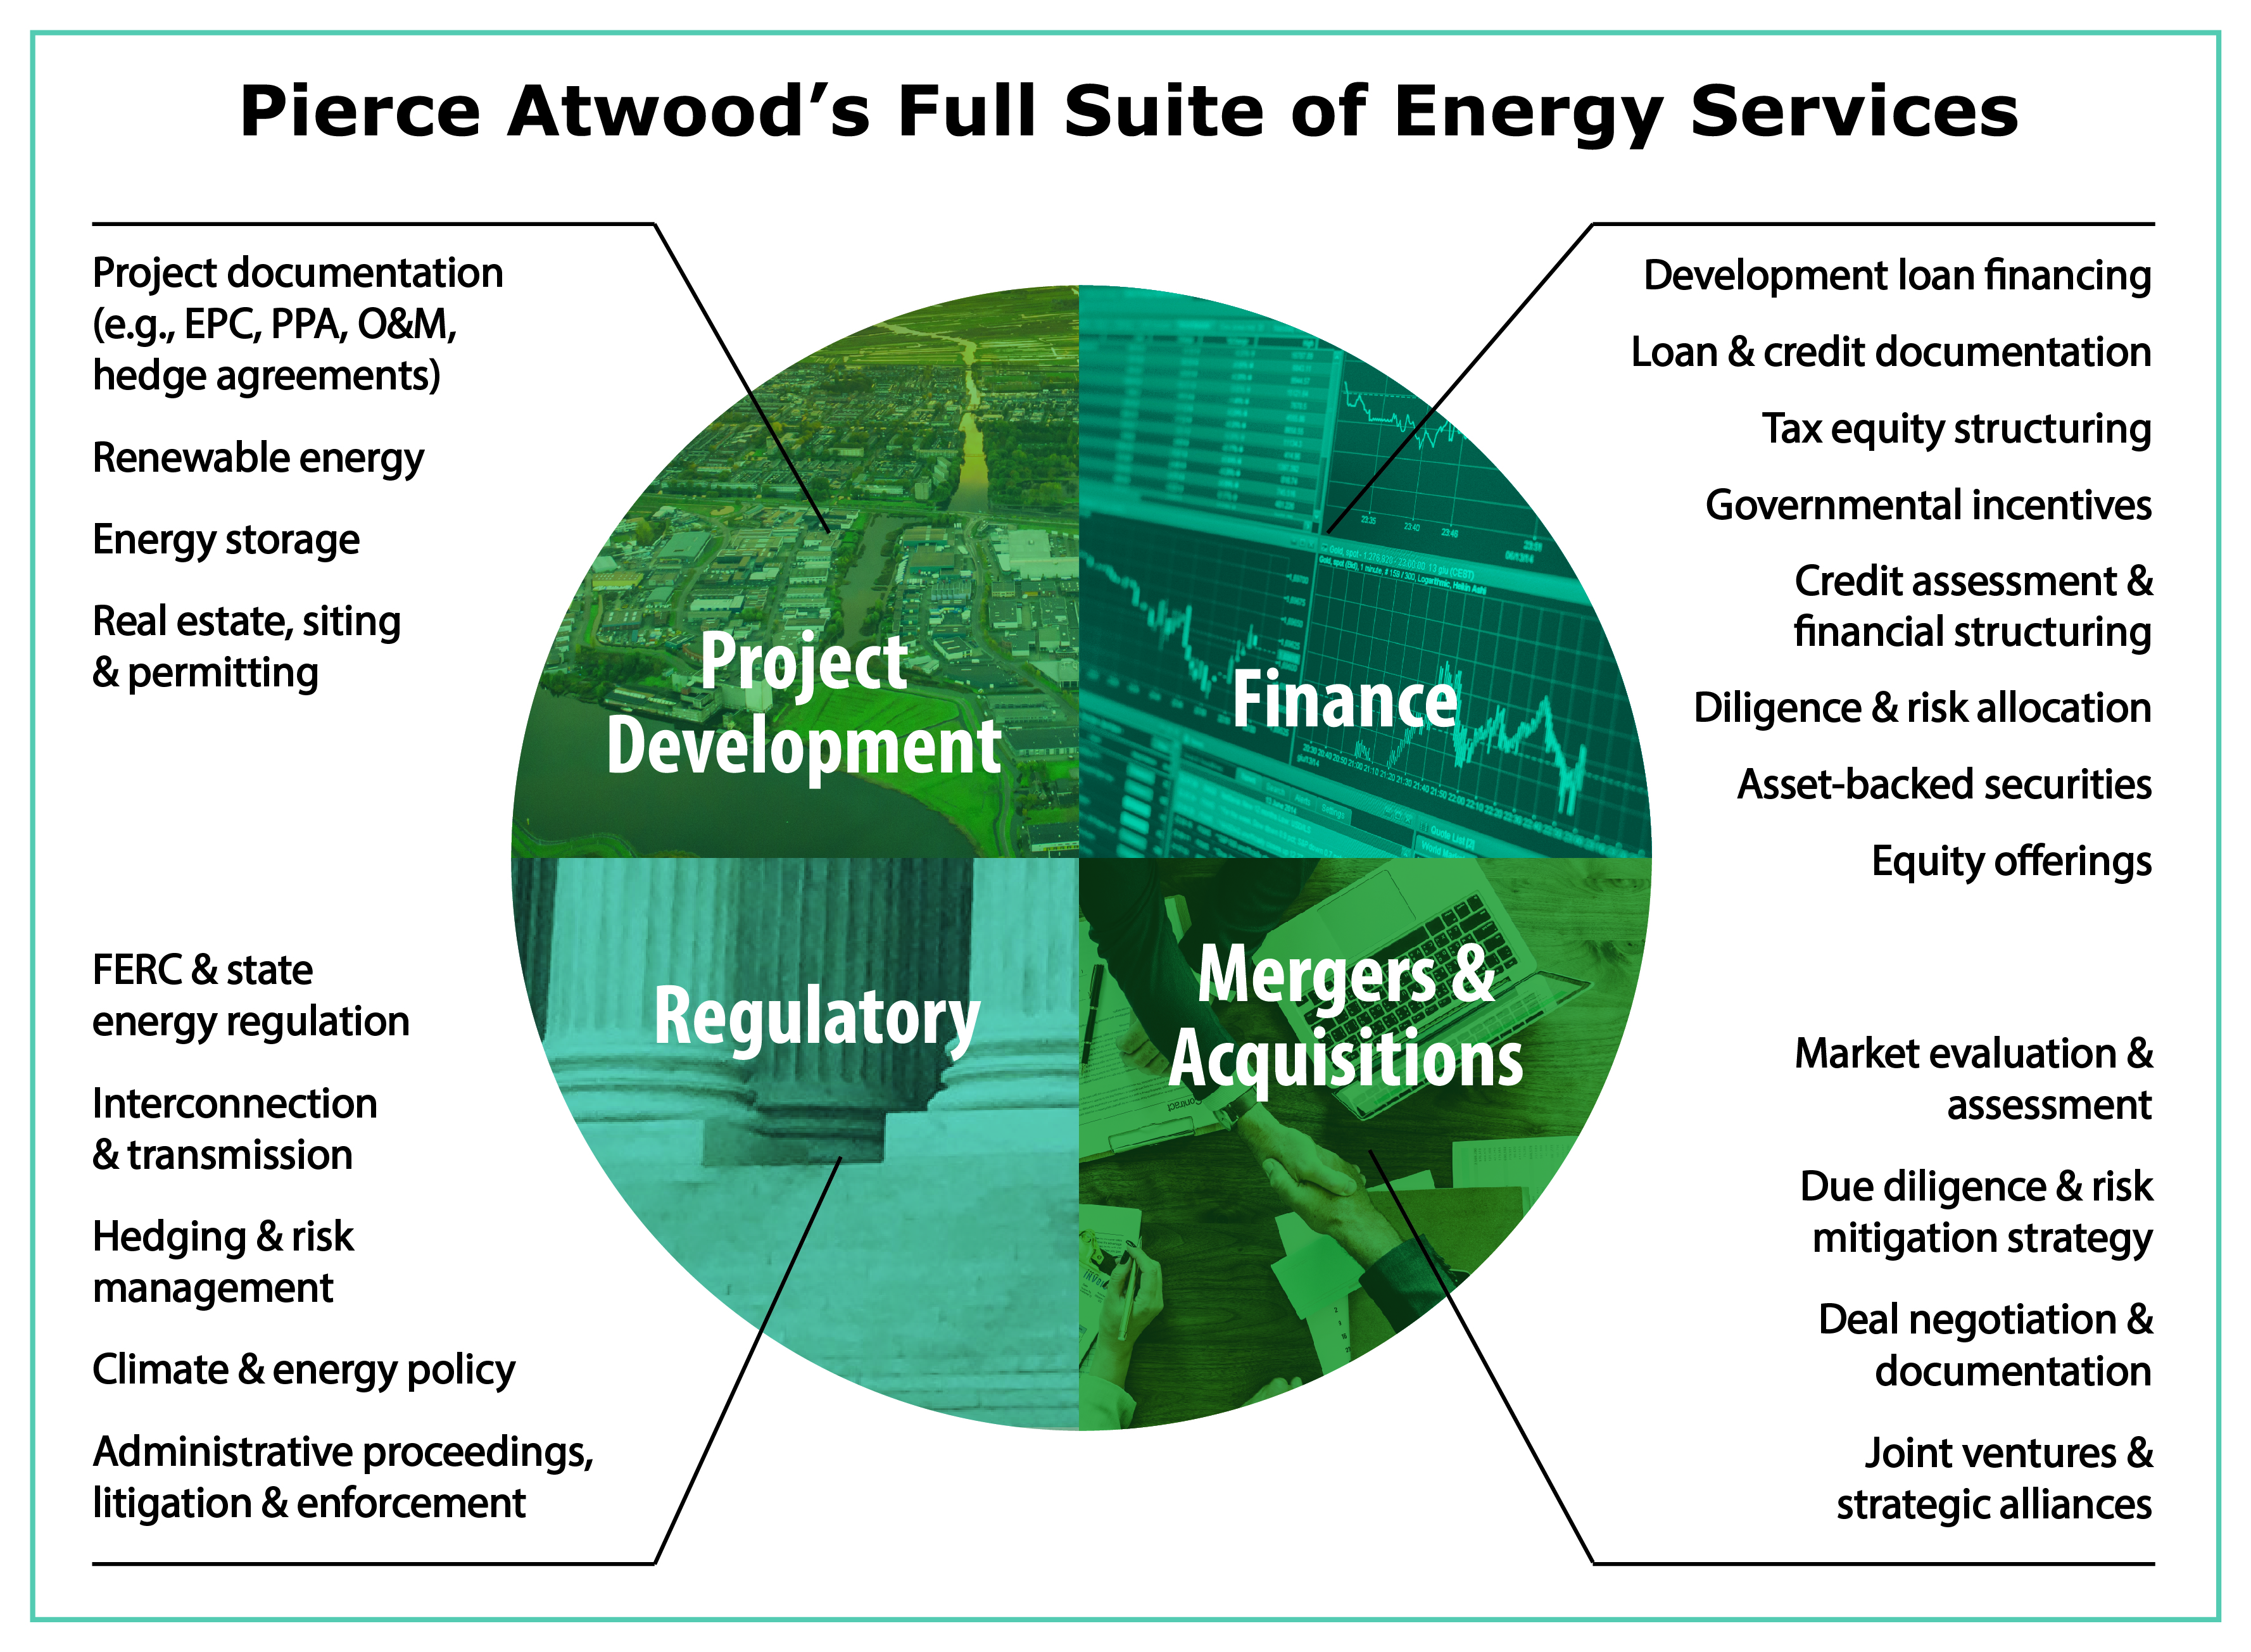 Energy infrastructure suite of energy services